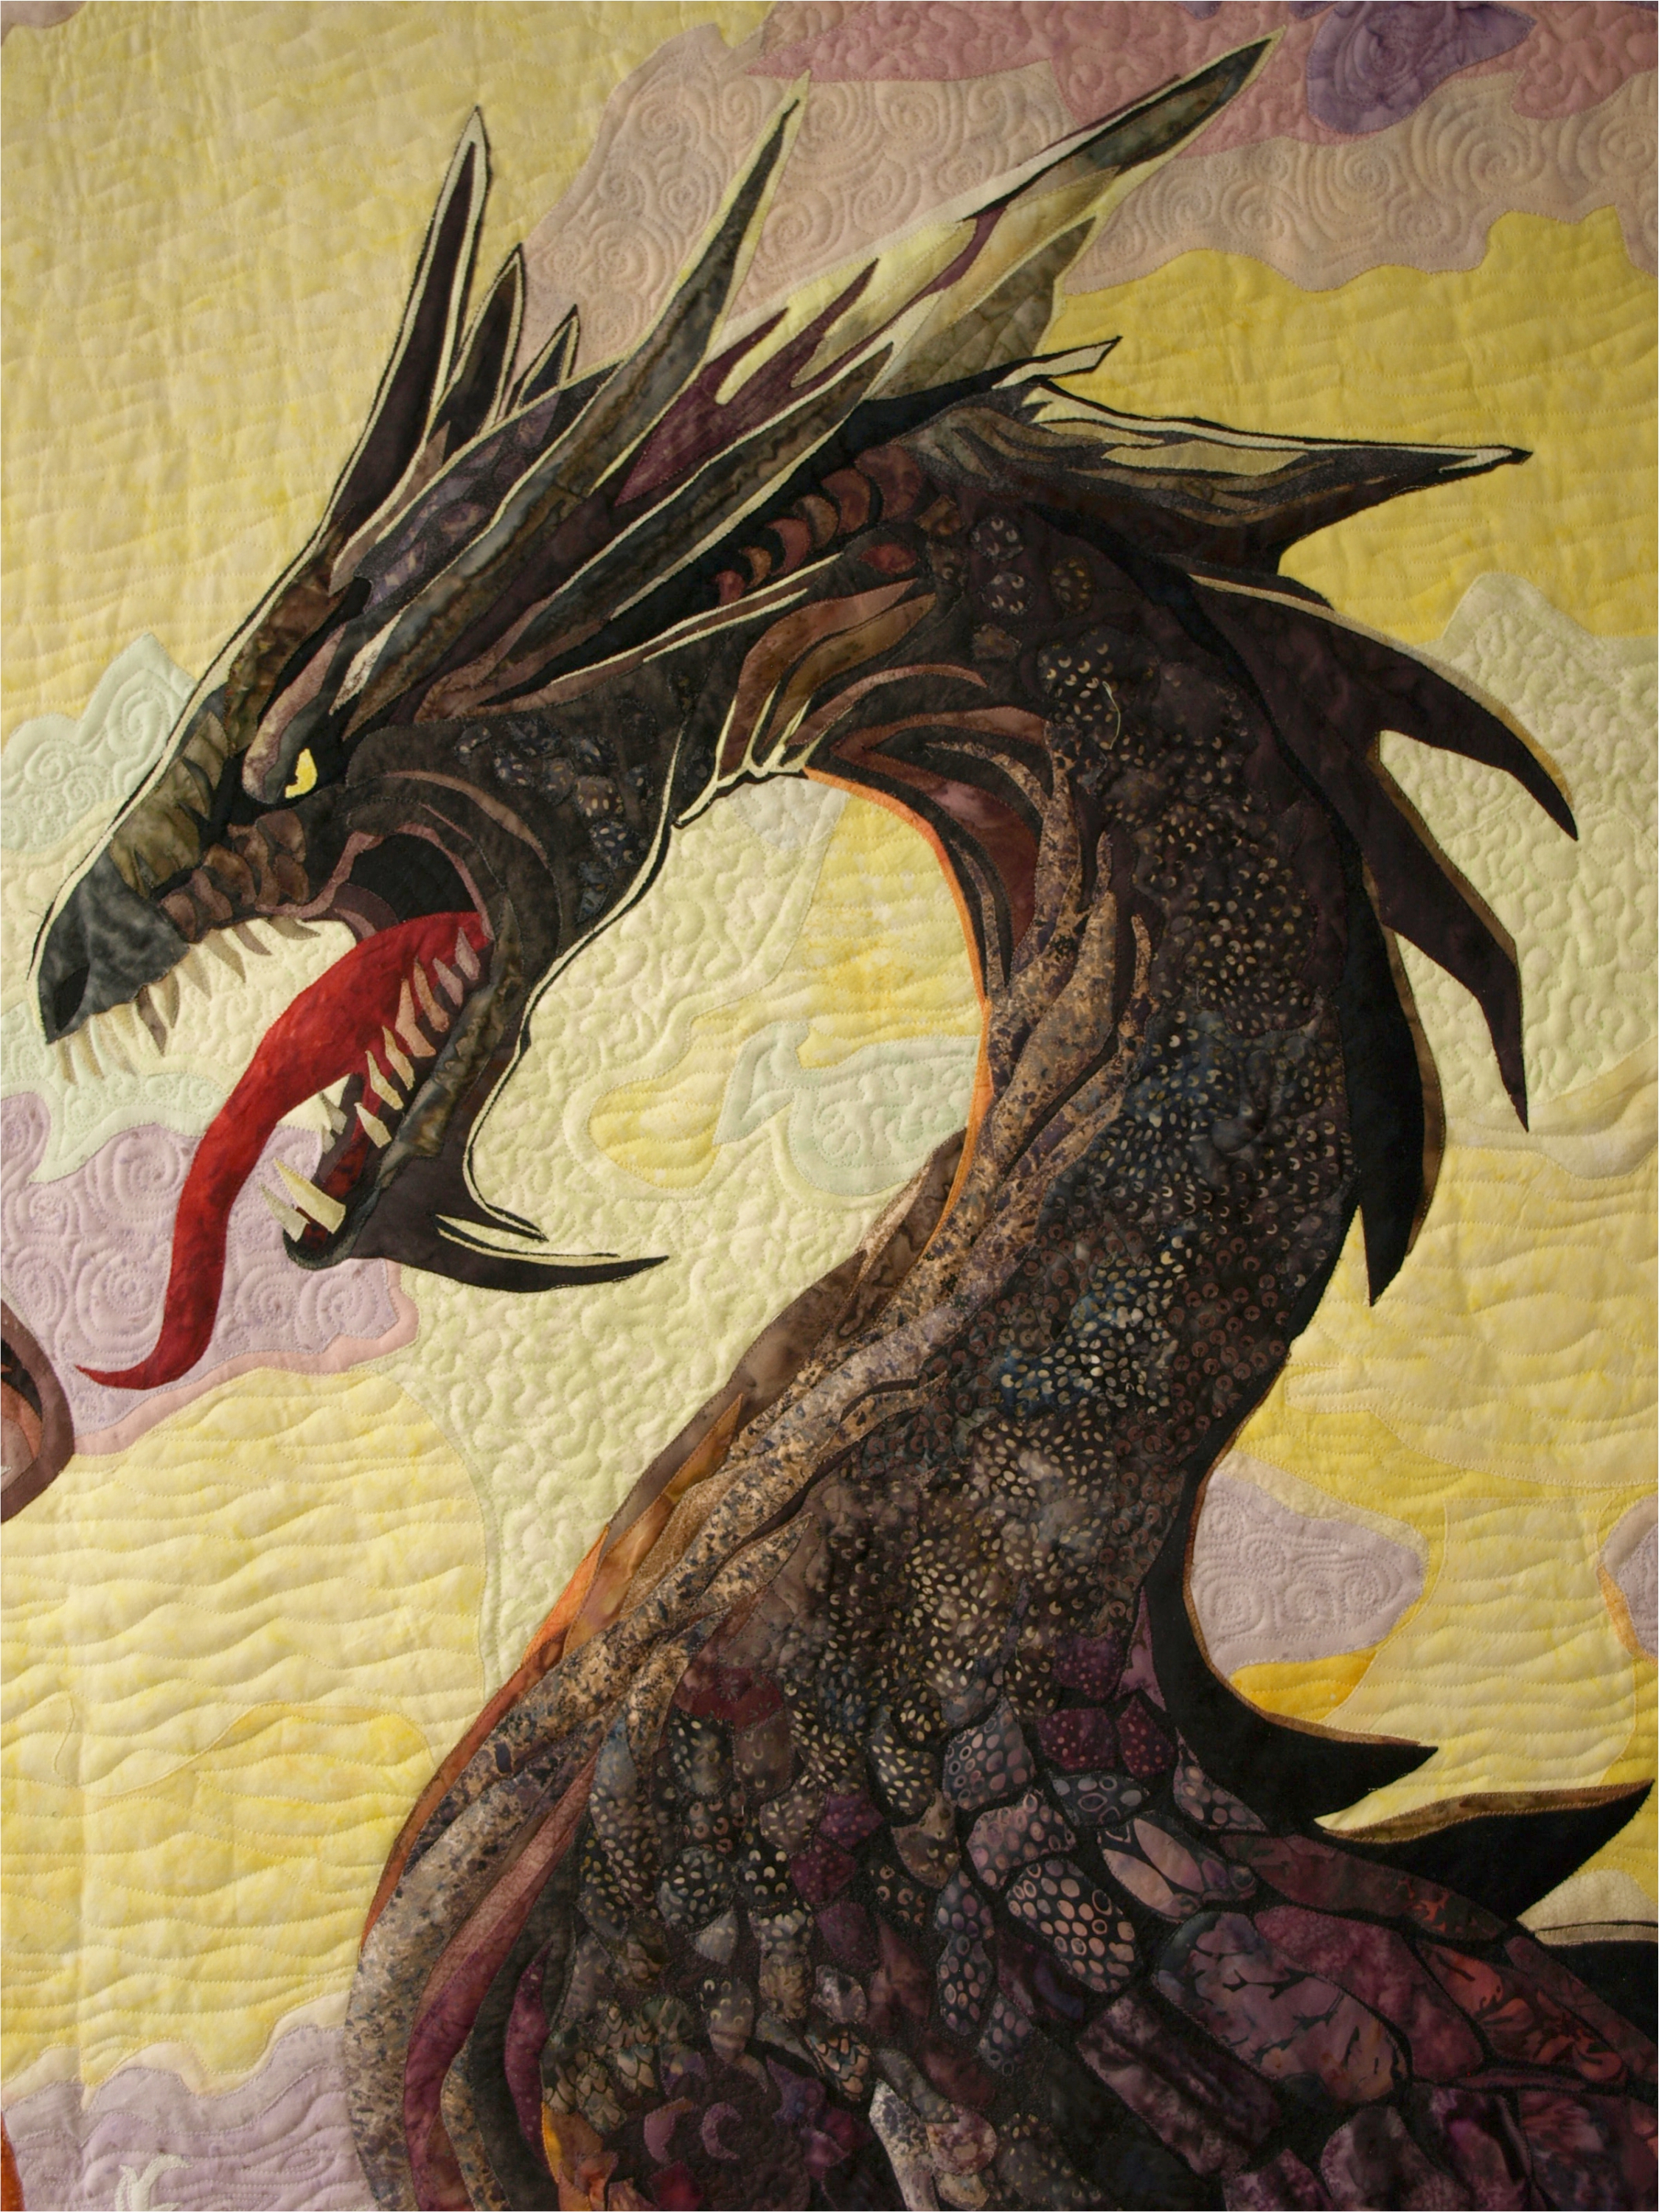 dragons-head-and-neck.jpg